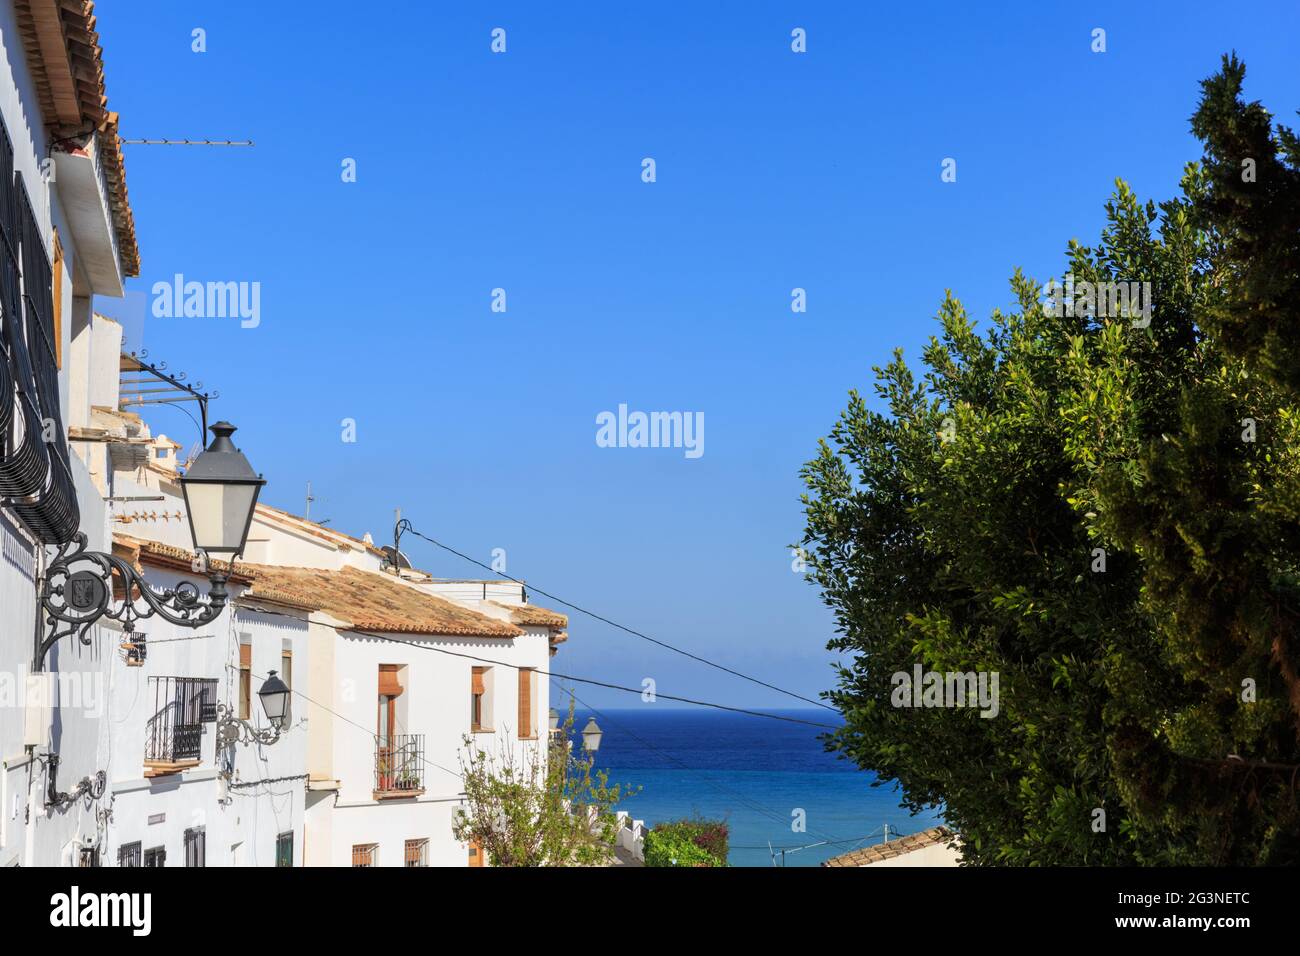 View along a traditional whitewashed Spanish village houses towards the Mediterranean Sea in Sella Old Town, Costa Blanca, Spain Stock Photo